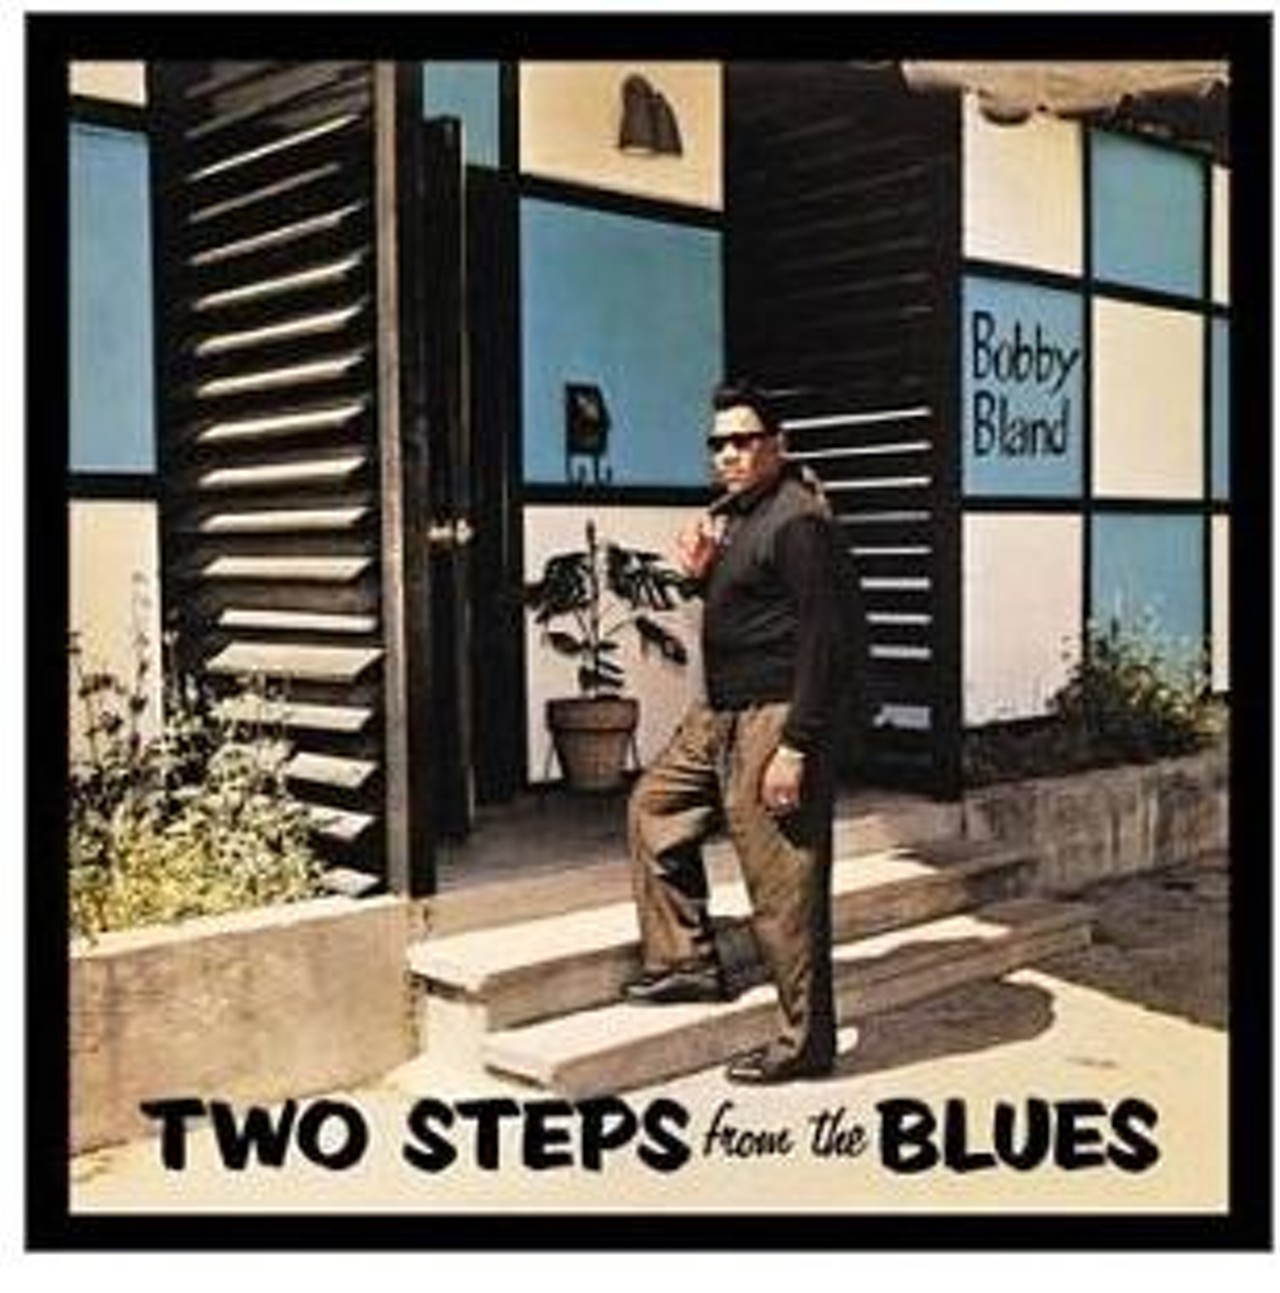 Bobby Bland: Two Steps from the Blues -- This oldie-but-goodie might be the one that started the whole story-based album cover tradition, and it remains one of the best ever. What form will those blues take, those blues that are just two short steps away from Bobby &ldquo;Blue&rdquo; Bland? An empty house? An angry woman brandishing a kitchen knife? A busted refrigerator? A sick cat? Buy the album and find out.